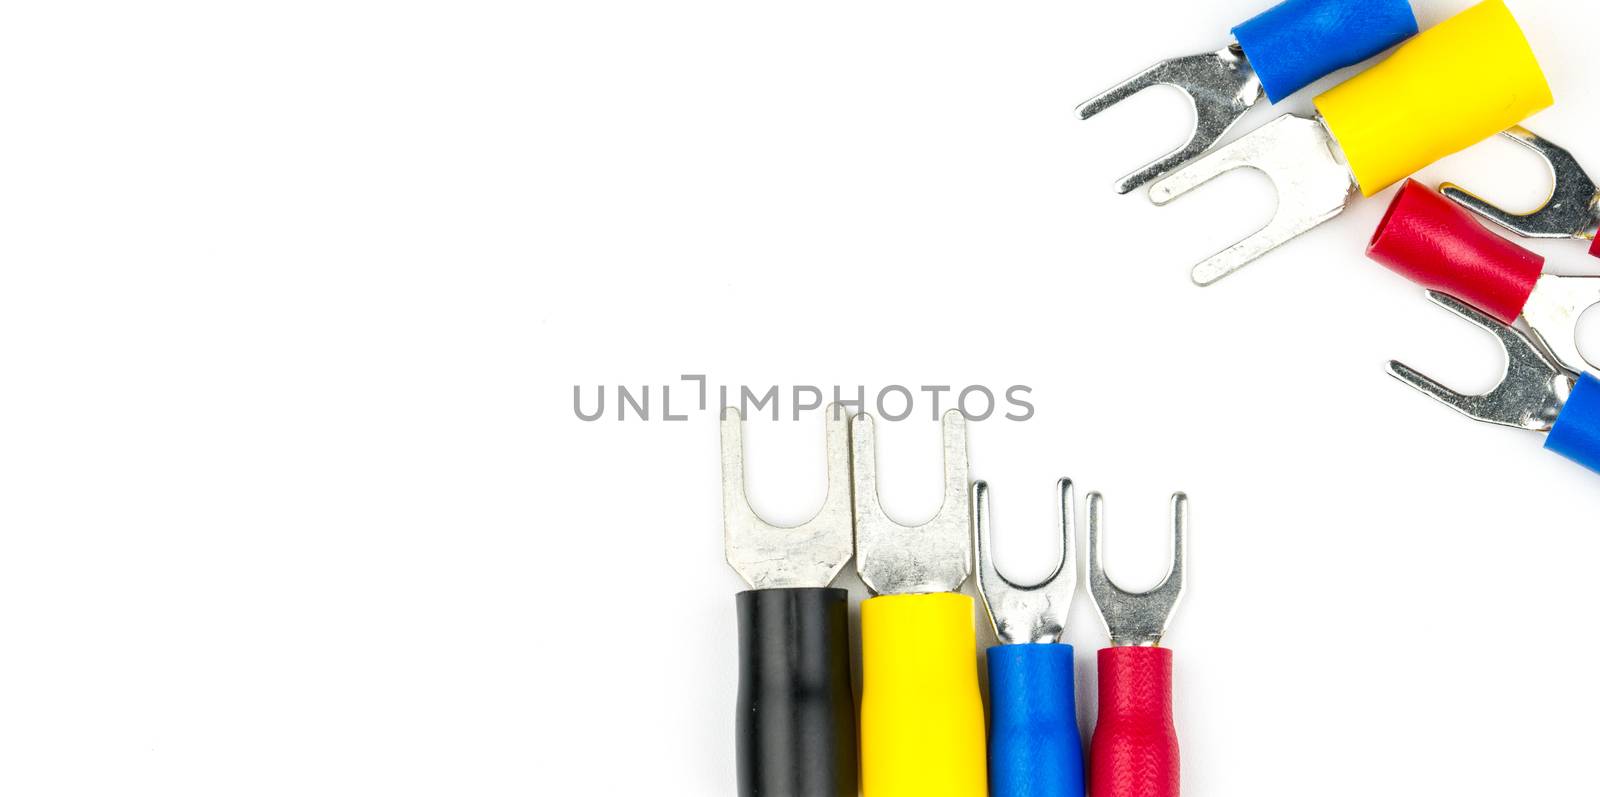 Spade terminals electrical cable connector accessories isolated on white background by Fahroni